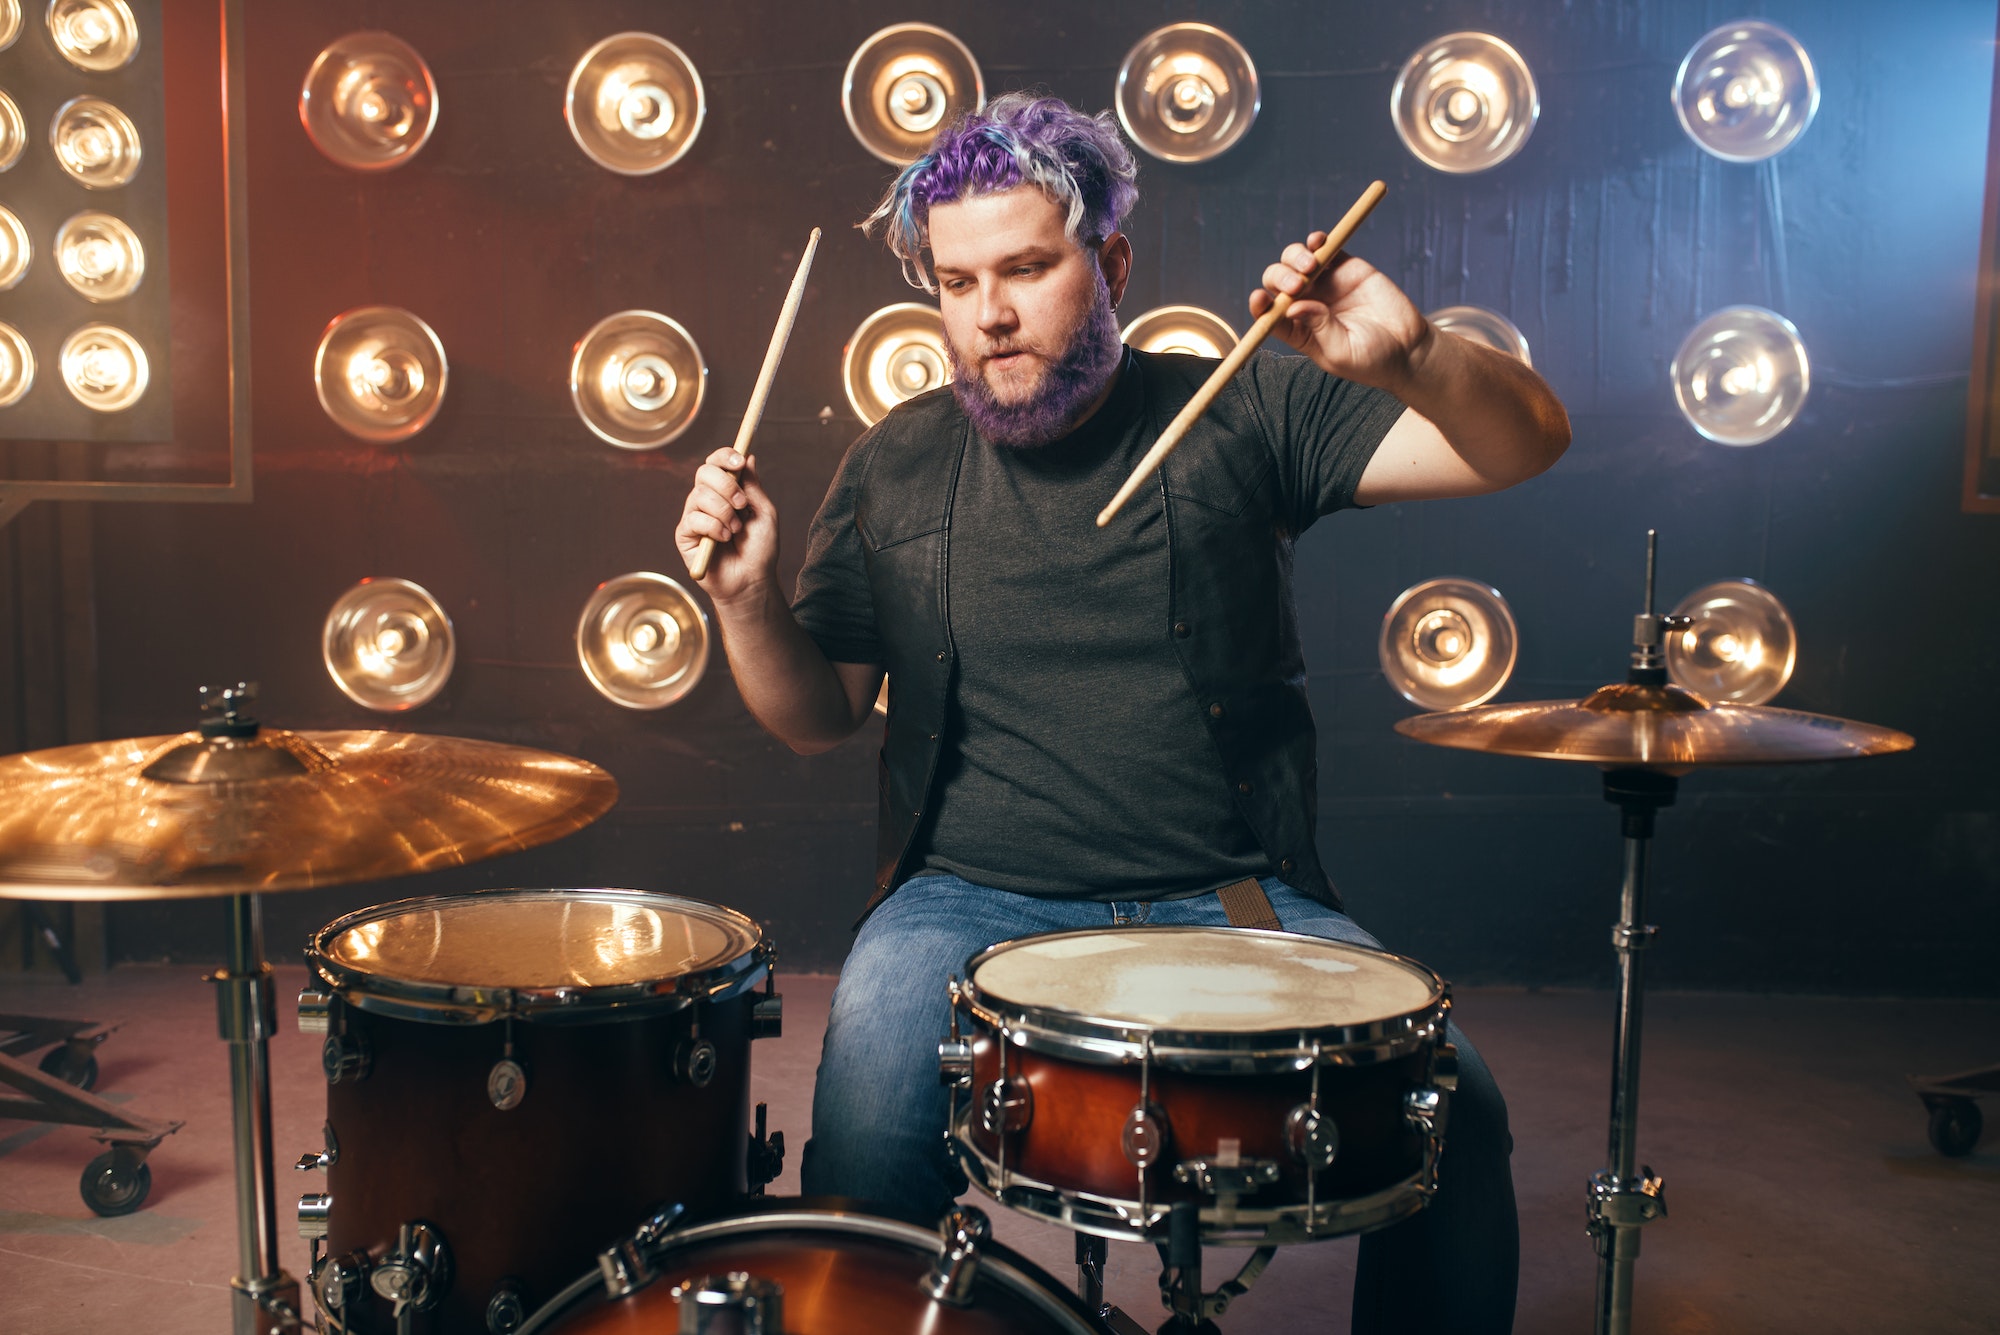 Bearded drummer with colorful hair on the stage